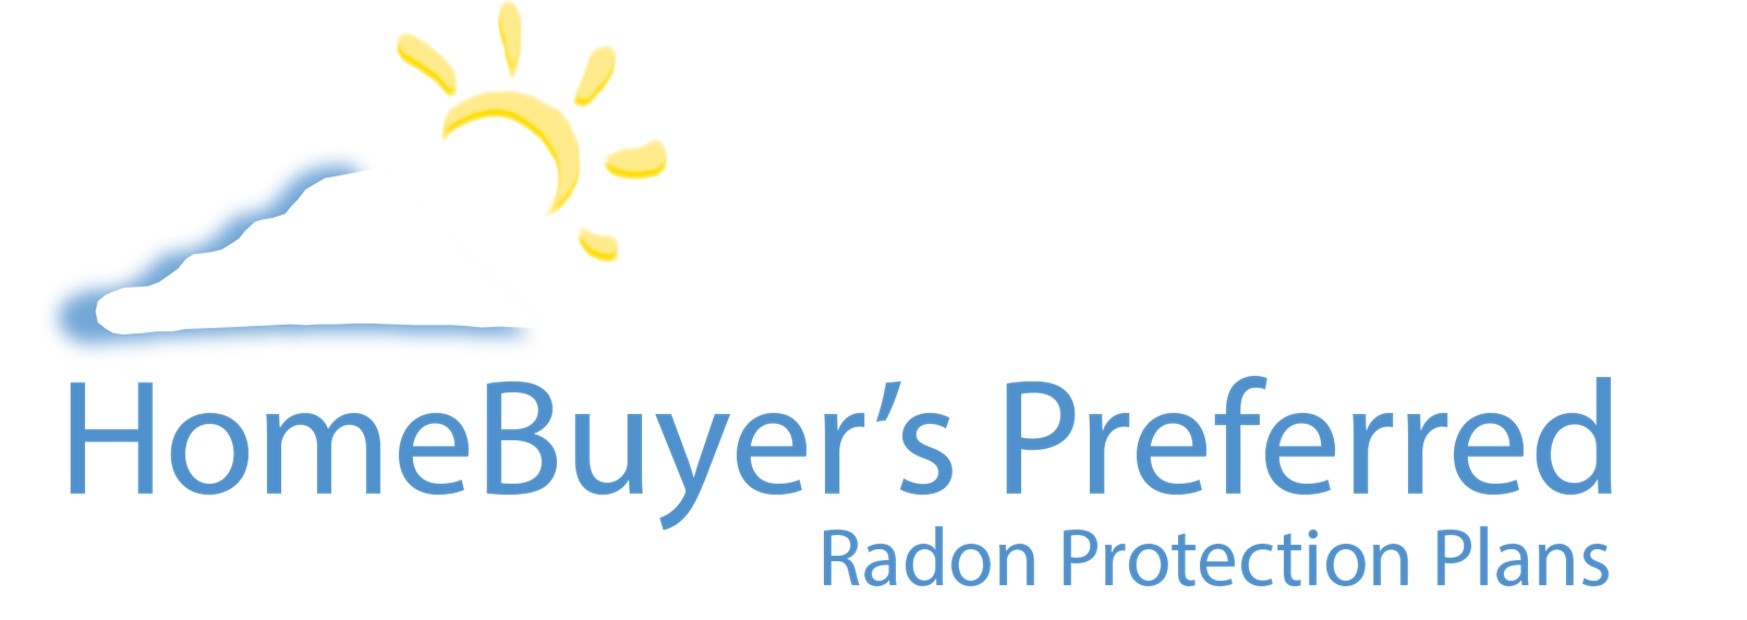 Homebuyer’s Preferred, a Radon Gas Company Dedicated Solely to the Relocation Industry, Relocates North American Headquarters  to Accommodate Growth